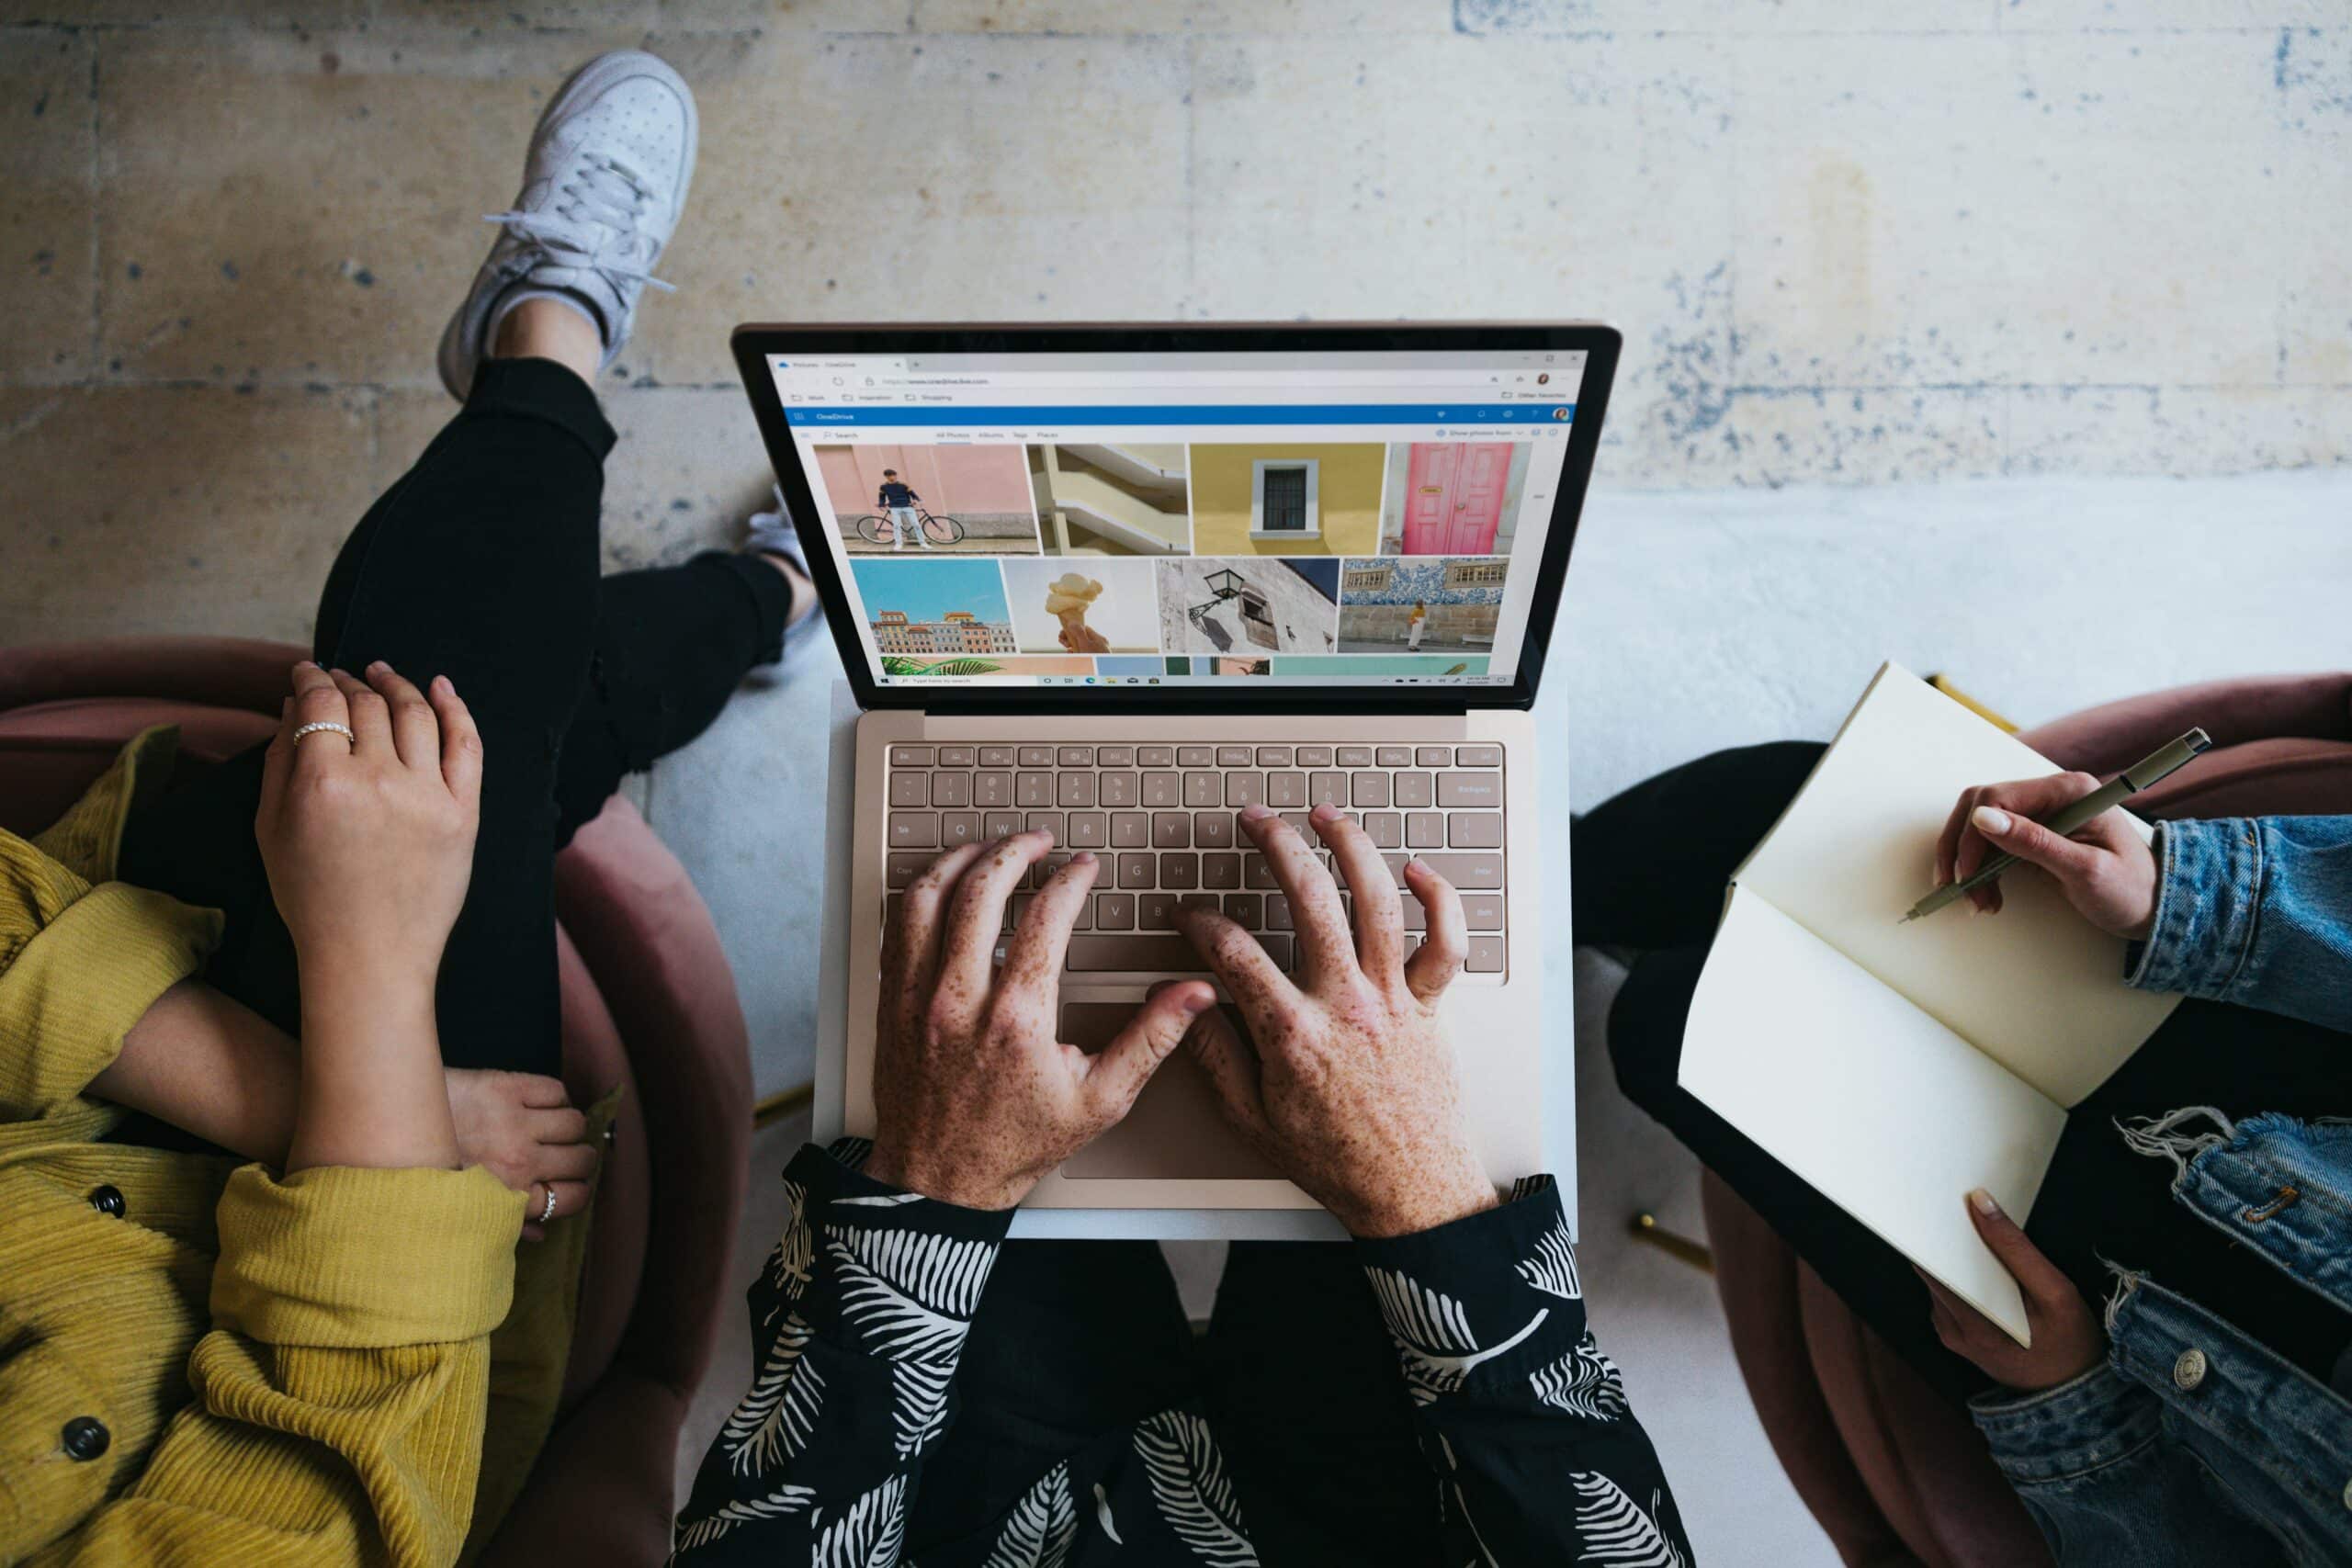 Source: https://unsplash.com/photos/person-using-microsoft-surface-laptop-on-lap-with-two-other-people-w79mIrYKcK4 Title: Niche Selection in Event Planning Alt. Title: Influencer Event Marketing Description: A person checking niche-specific ideas on their computer